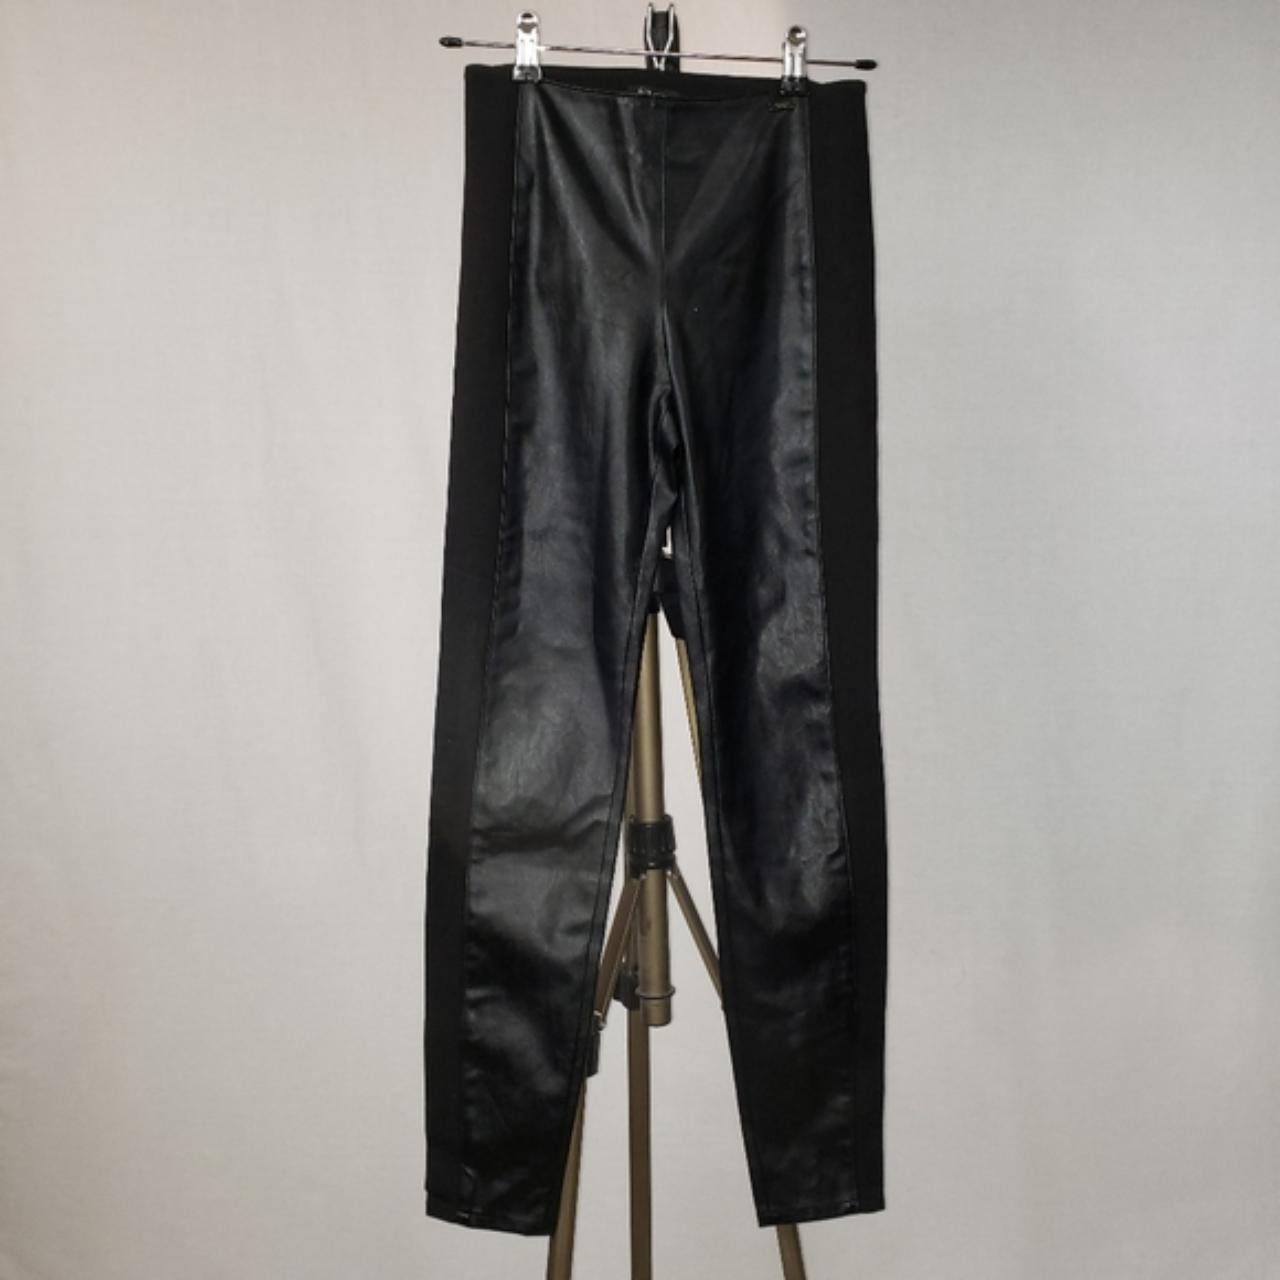 Faux leather panel Armani Exchange pants with side... - Depop